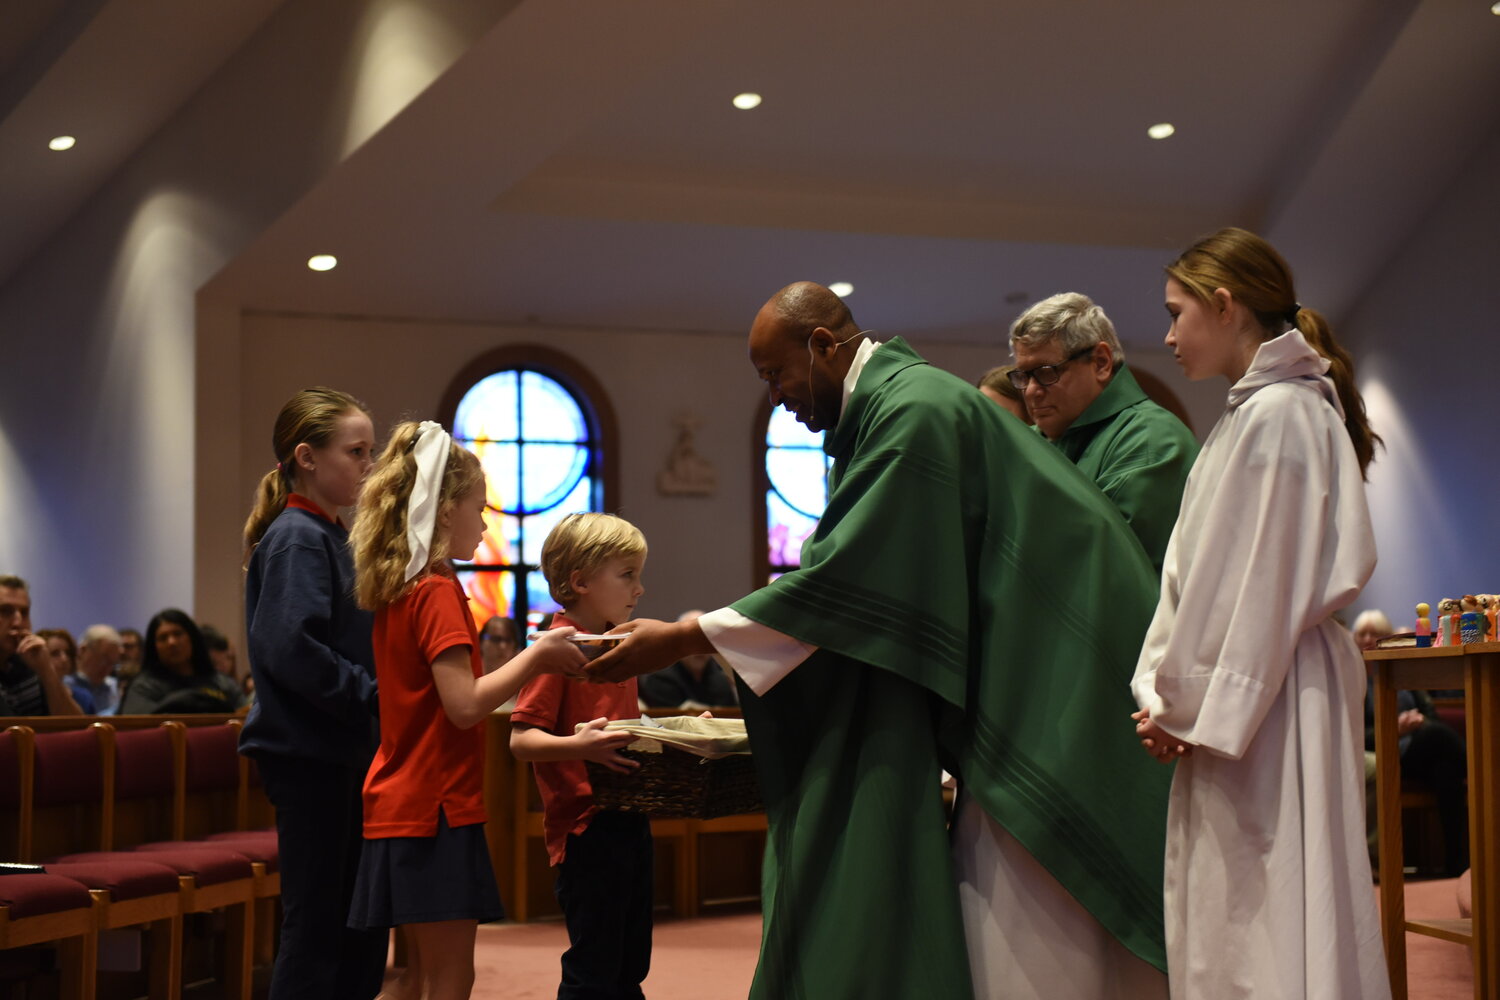 Students of Our Lady of Lourdes Interparish School in Columbia present the gifts at the Offertory to Father Roberto Ike, newly installed pastor of Our Lady of Lourdes Parish, at Mass on Sunday, Jan. 28, the first day of Catholic Schools Week.